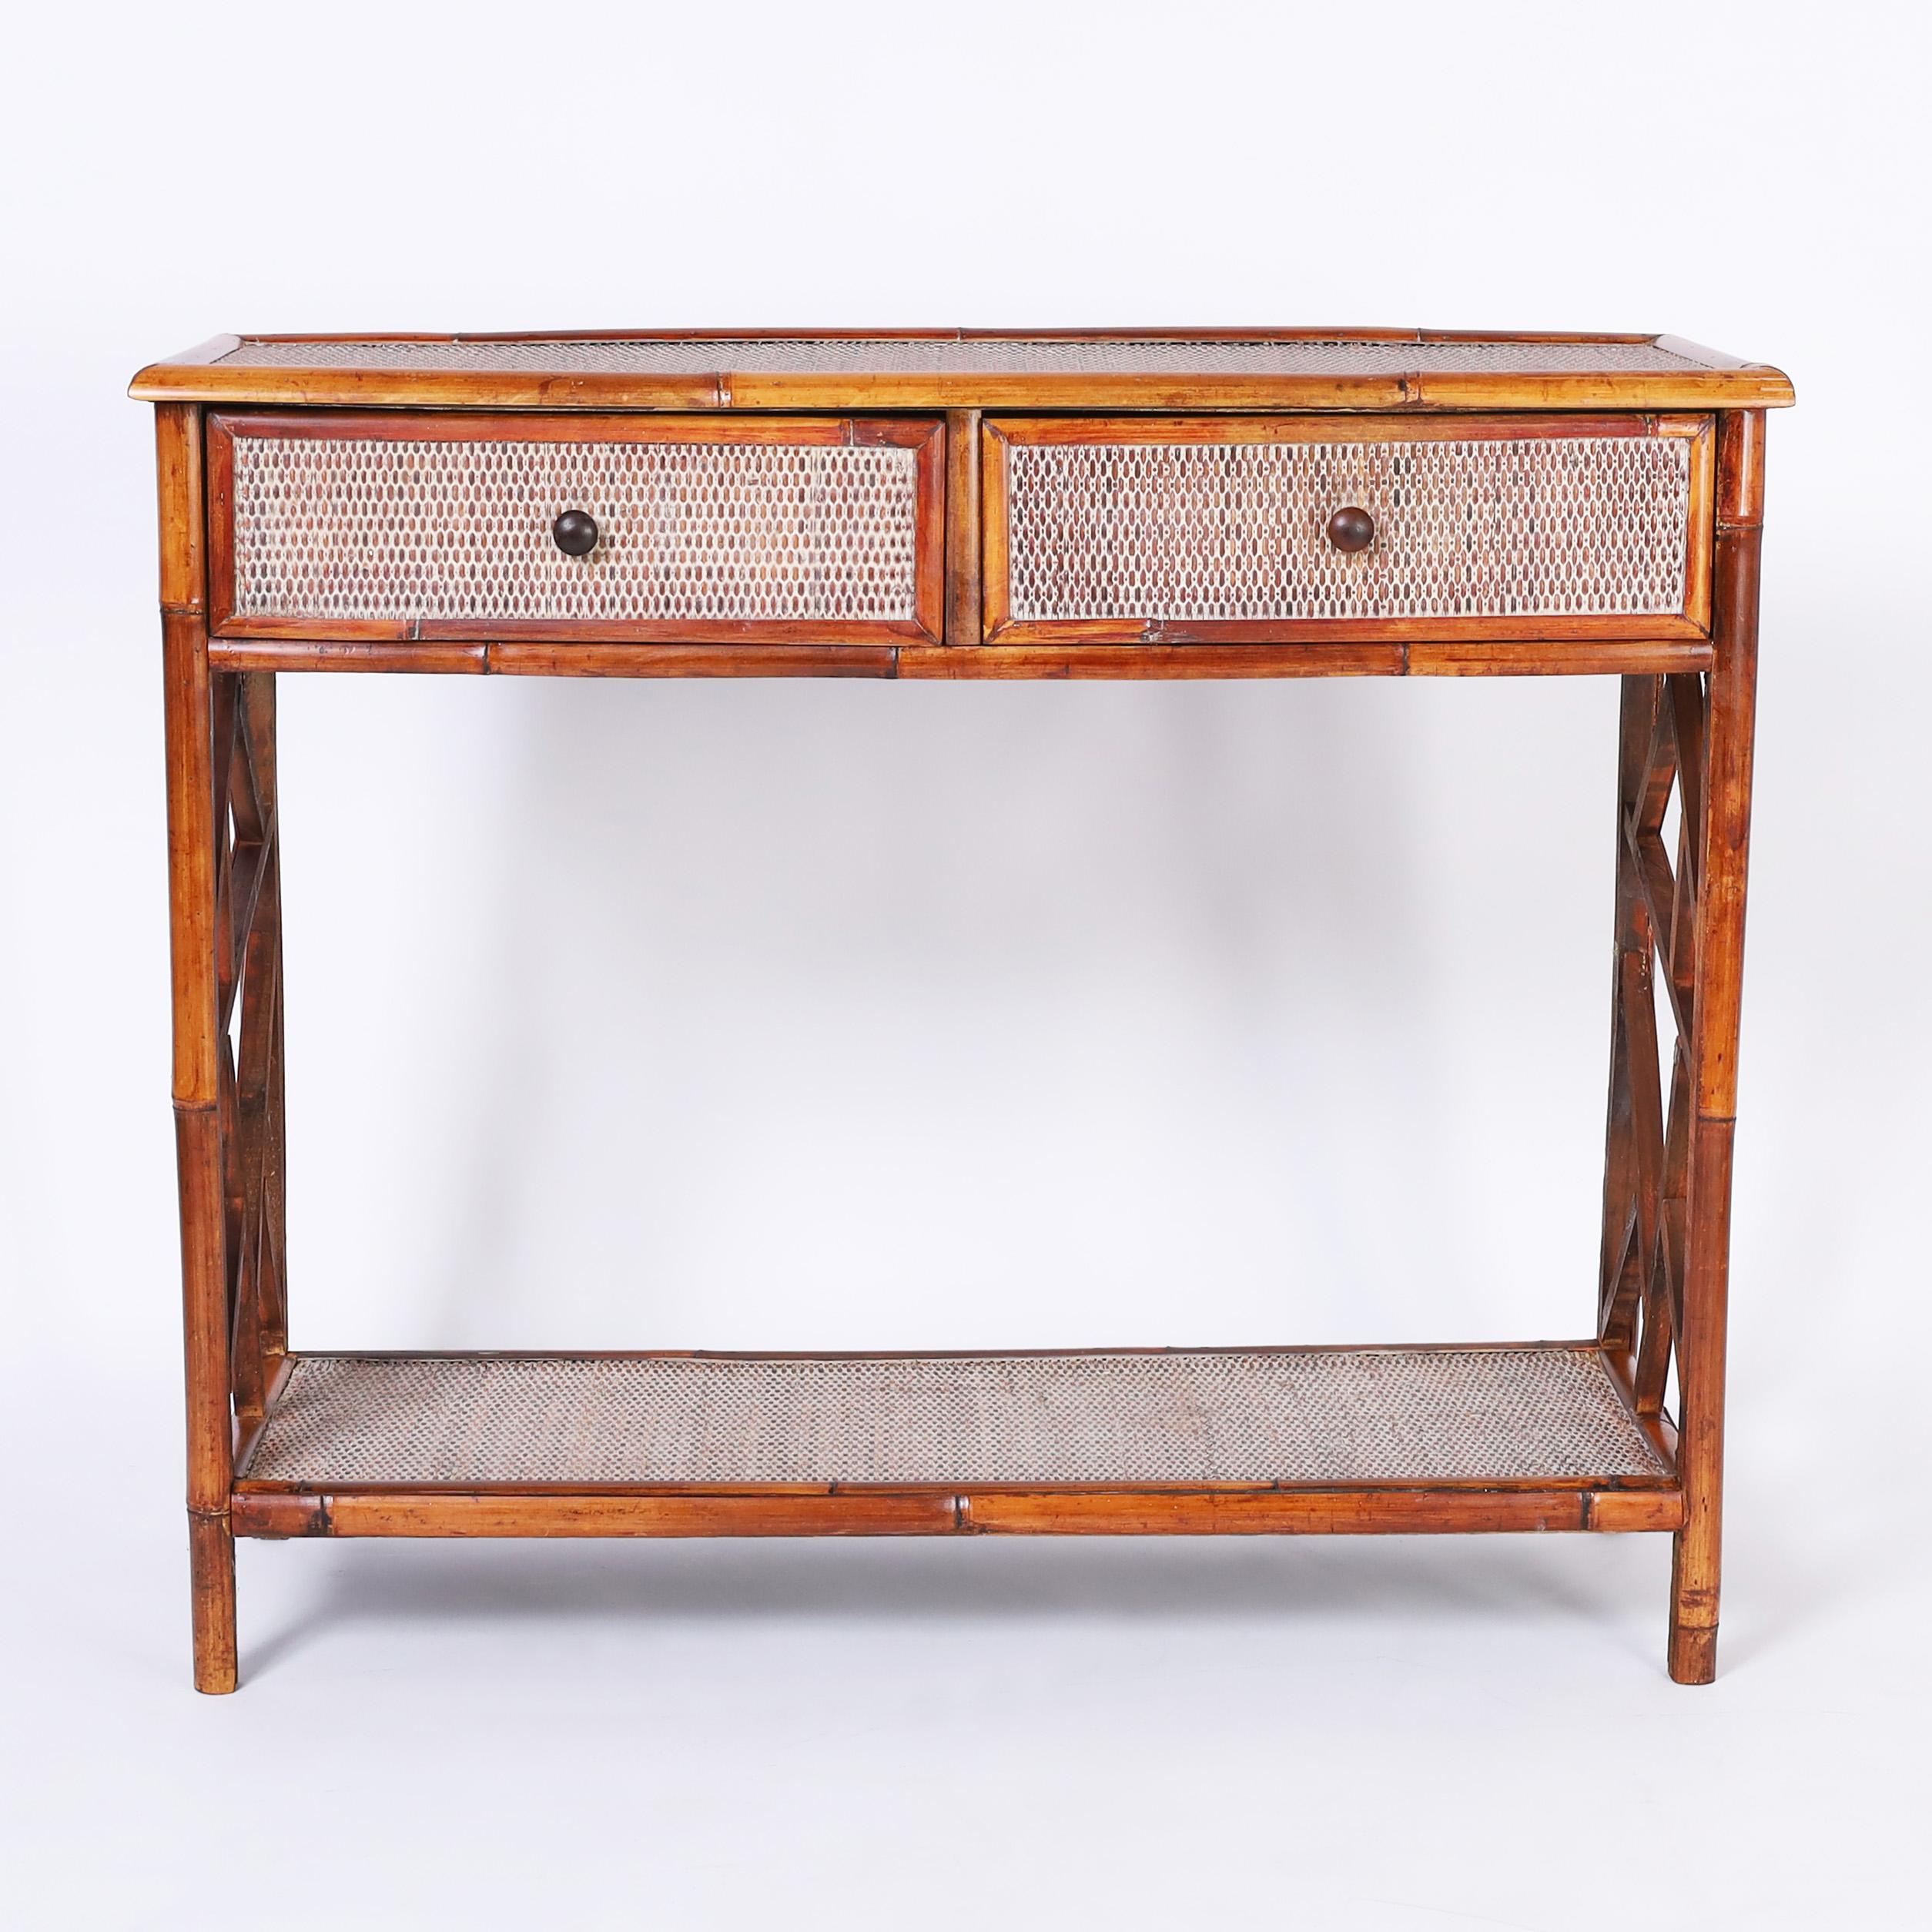 Handsome British Colonial style server or console crafted in bamboo with grasscloth panels on two tiers with a two drawer case and featuring Chinese chippendale motifs on the sides.